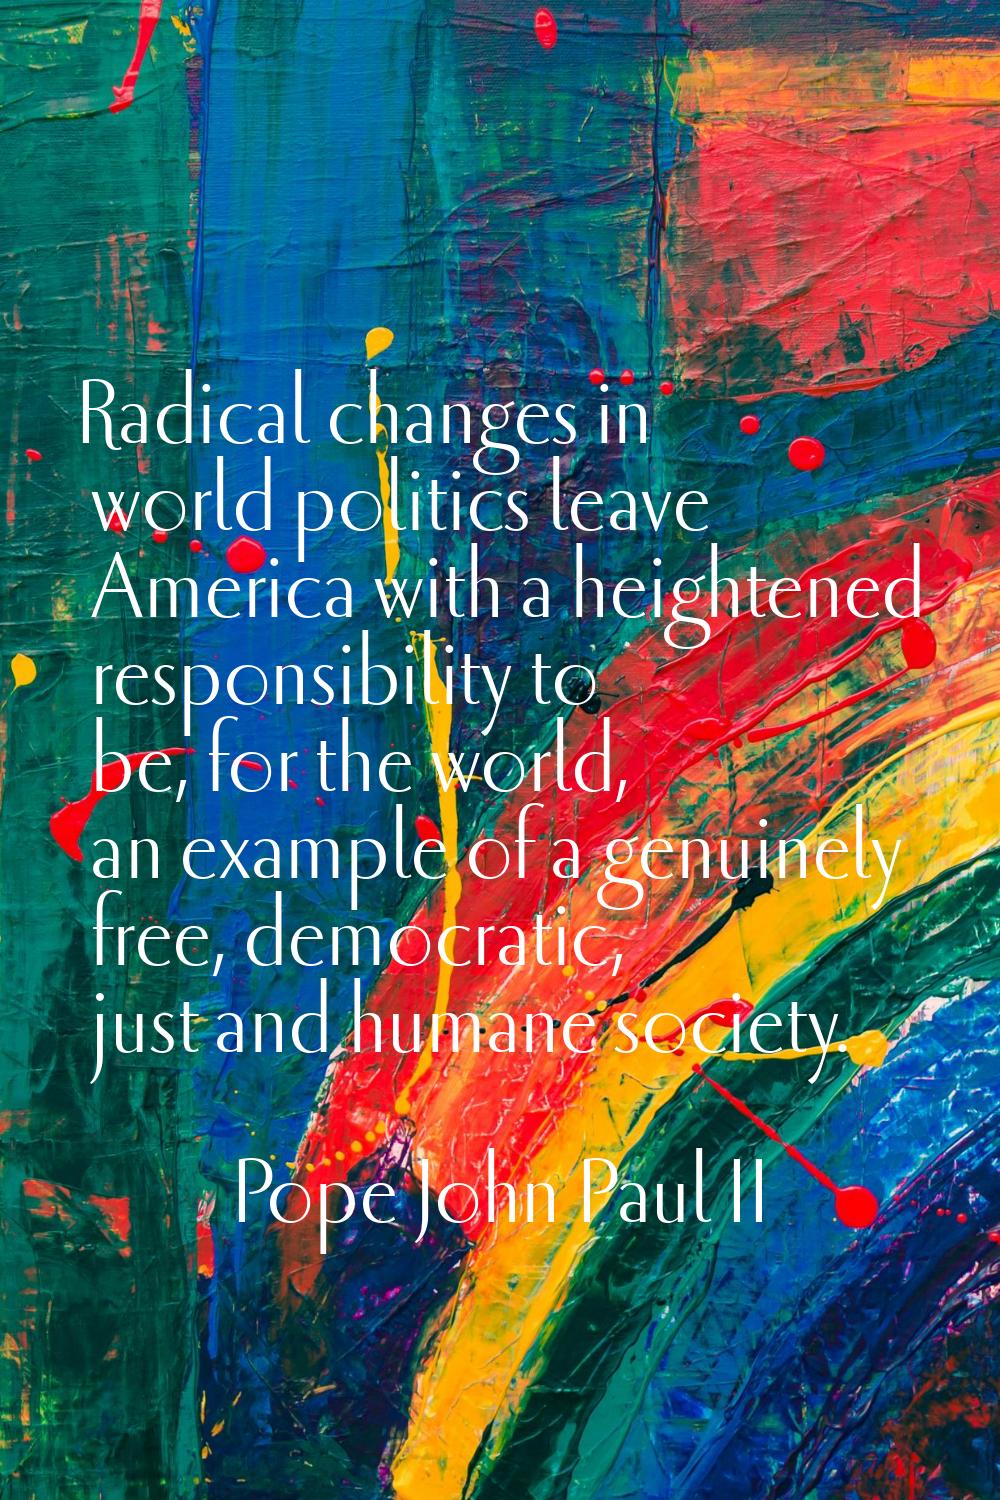 Radical changes in world politics leave America with a heightened responsibility to be, for the wor